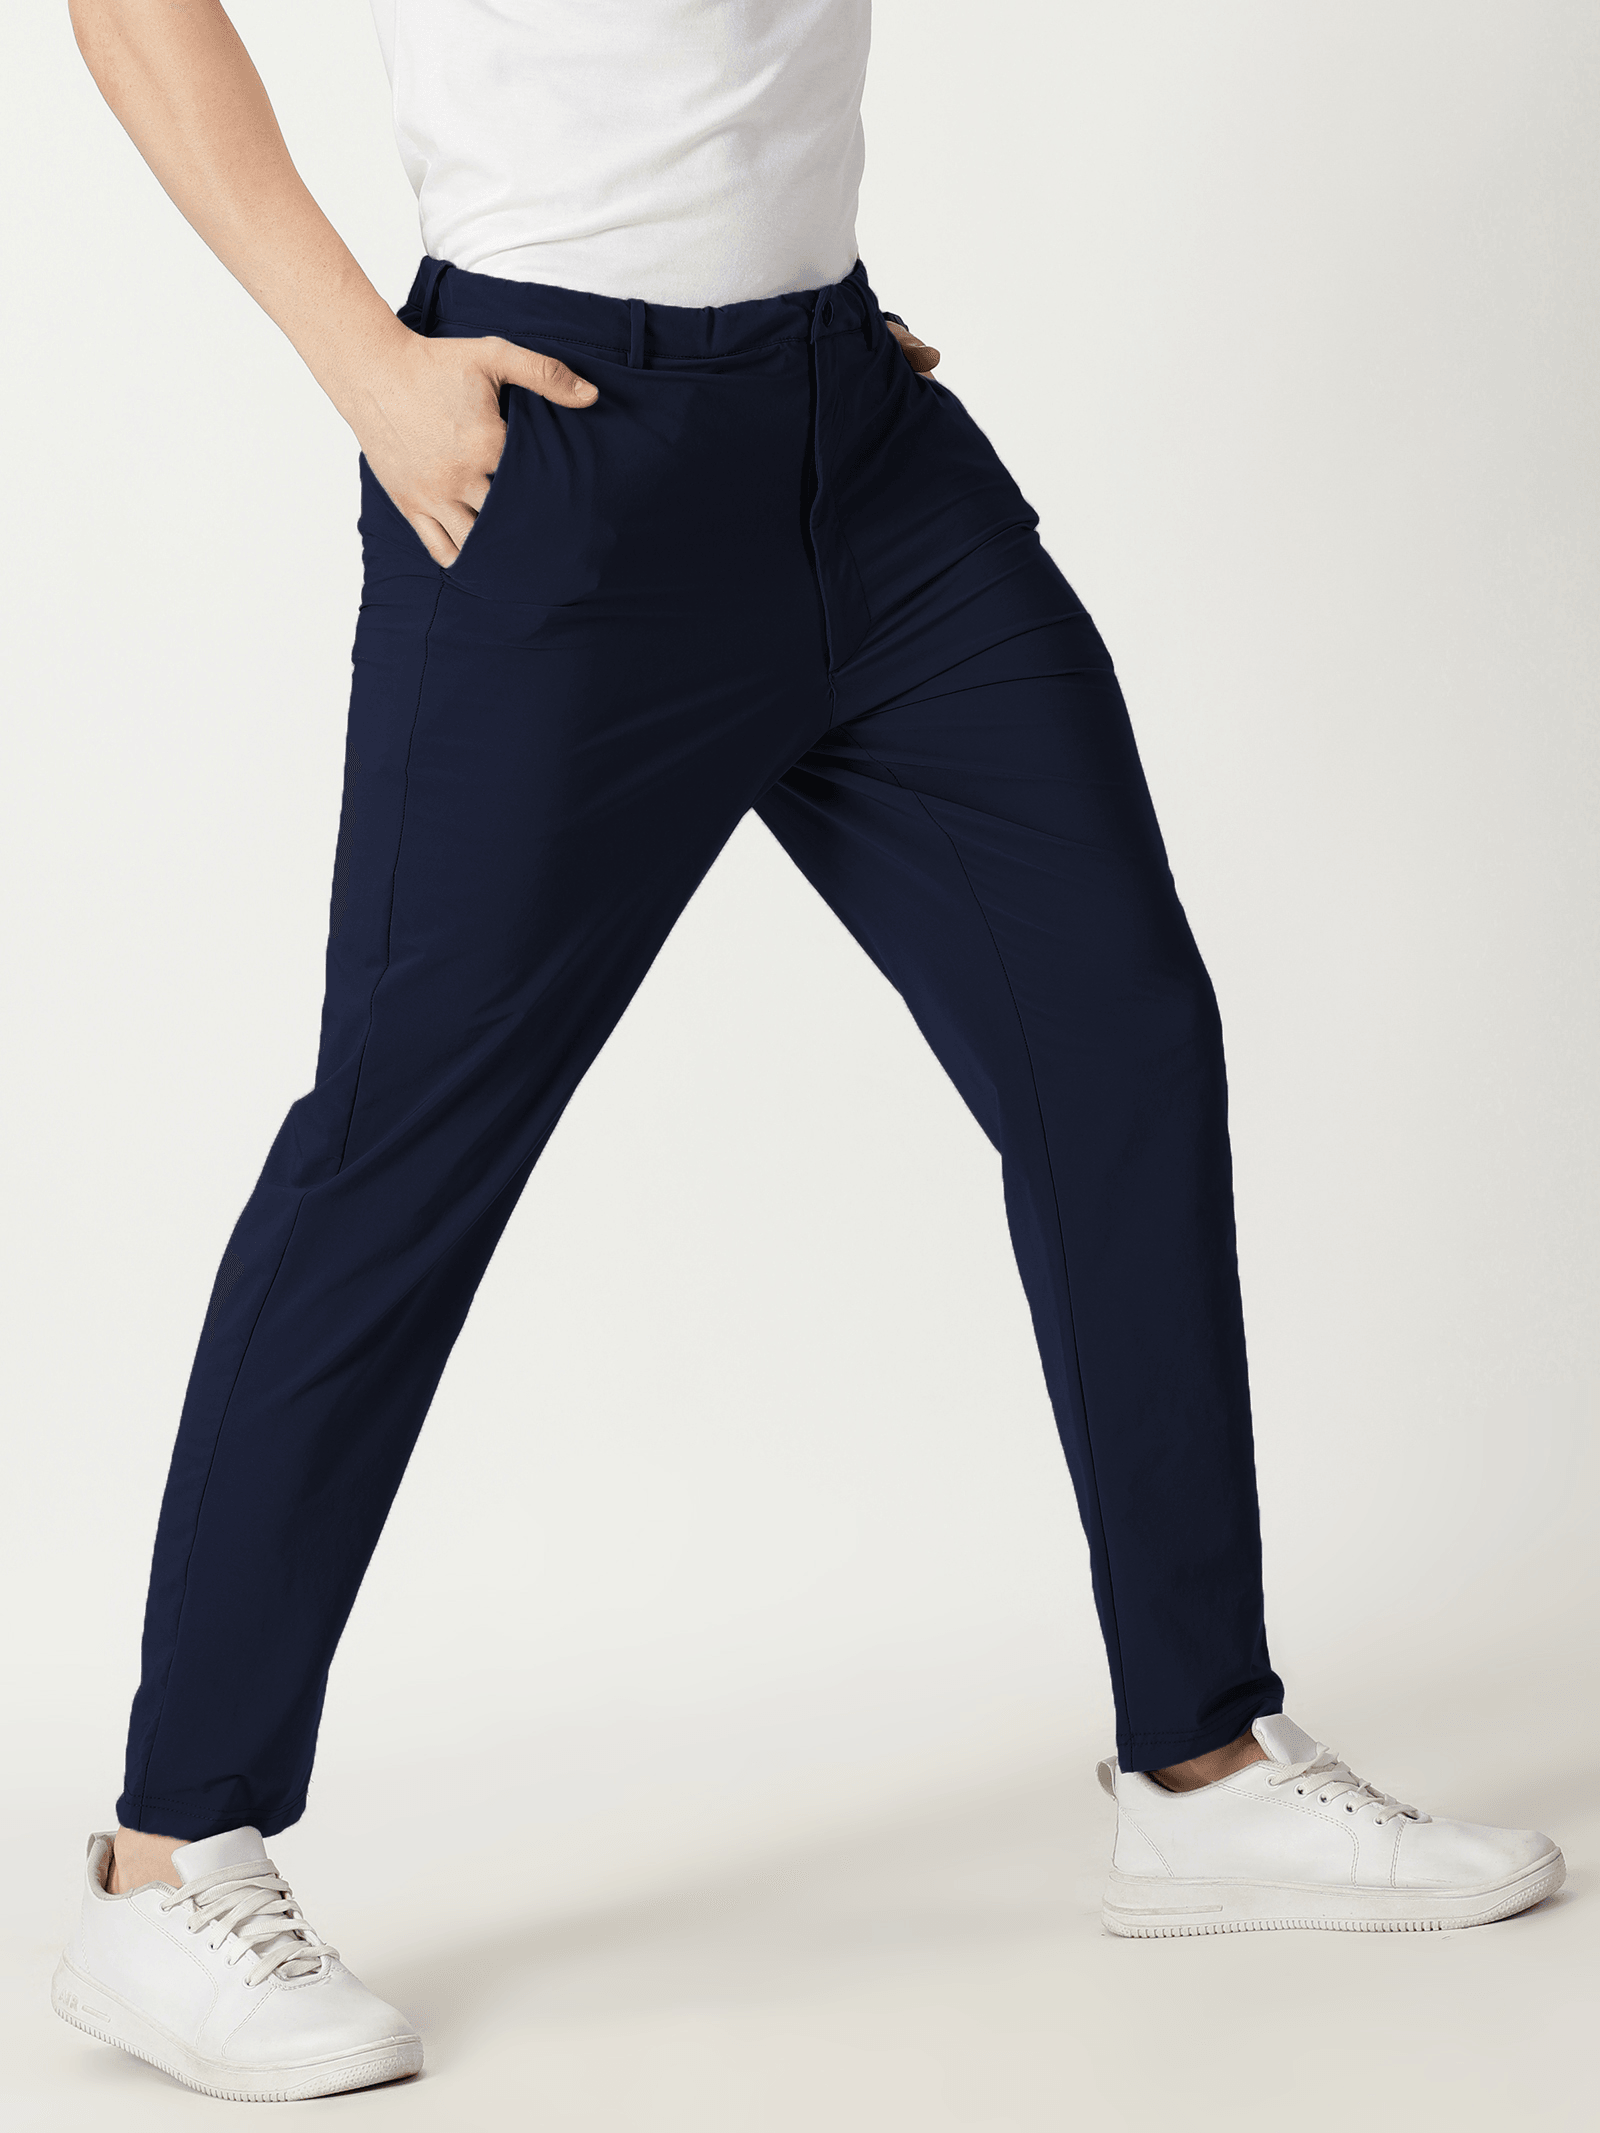 Sweatpants, Joggers, and More Cozy Pants from  Are Under $35